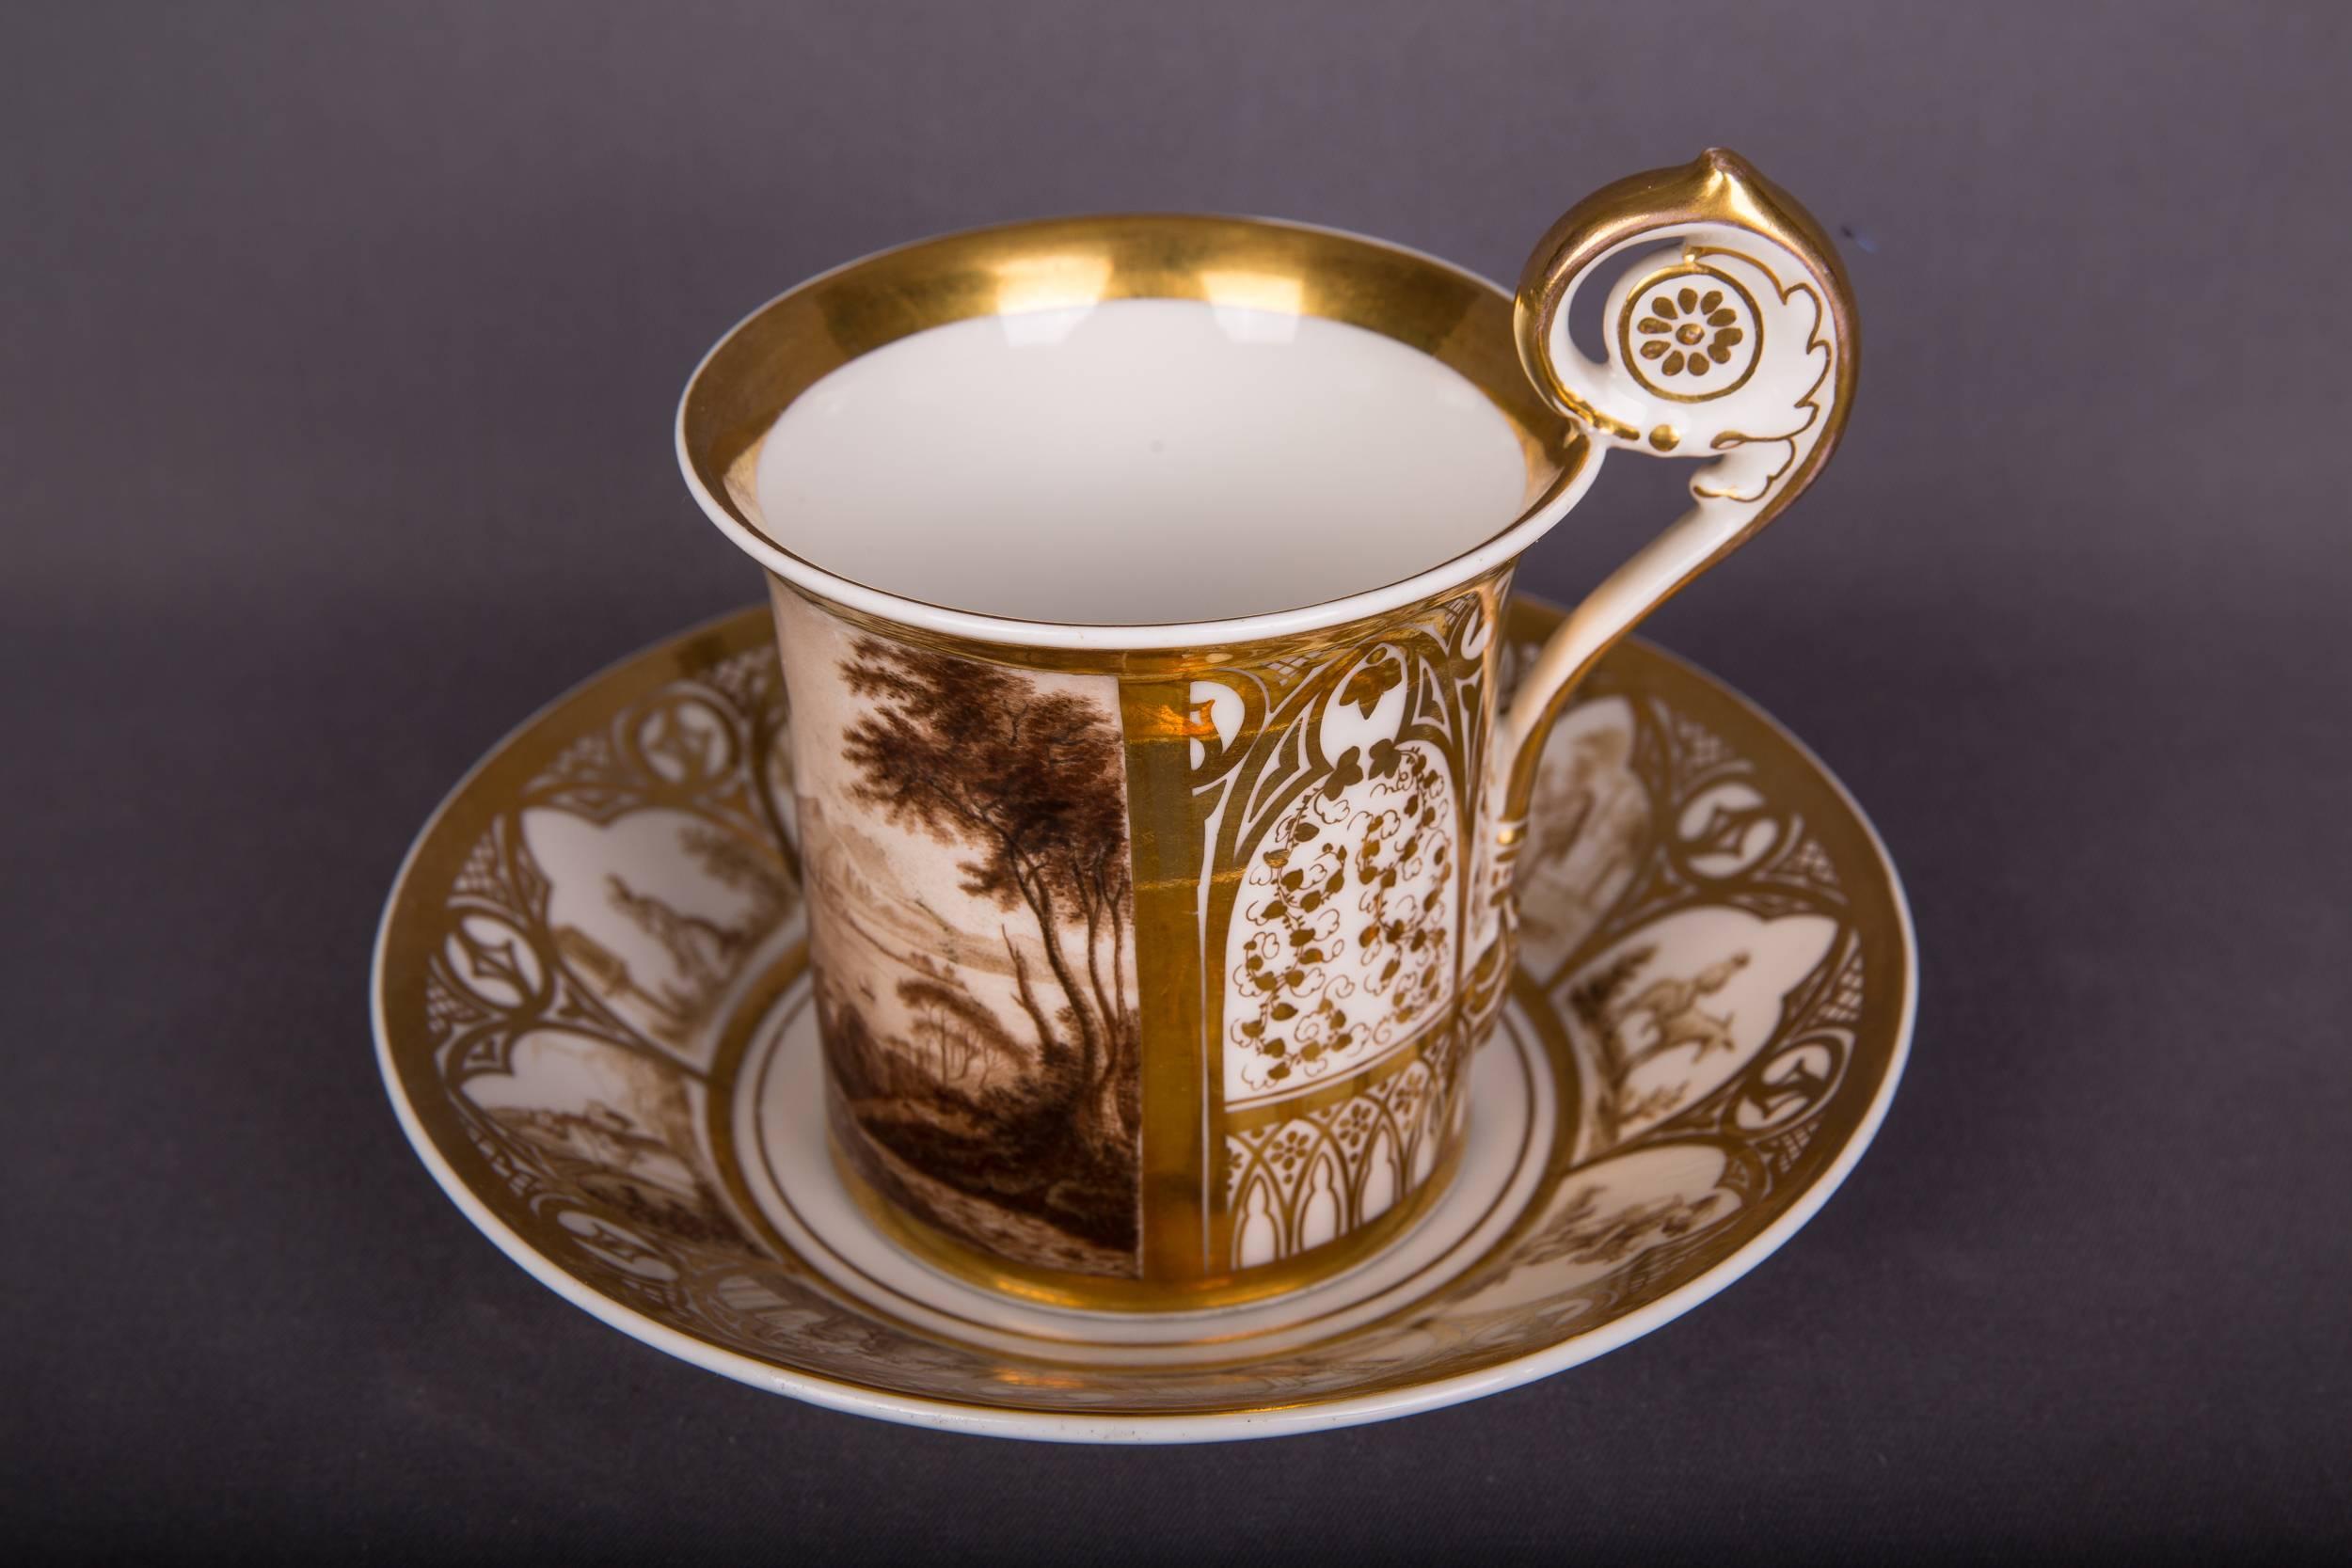 Very elaborate and finely painted

Very fine finish

Dimensions:
Cup (height: 12 cm diameter: 10 cm)
Saucer (Height: 3.5 cm diameter: 17 cm)

The place setting is not damaged and is in a good historical condition.